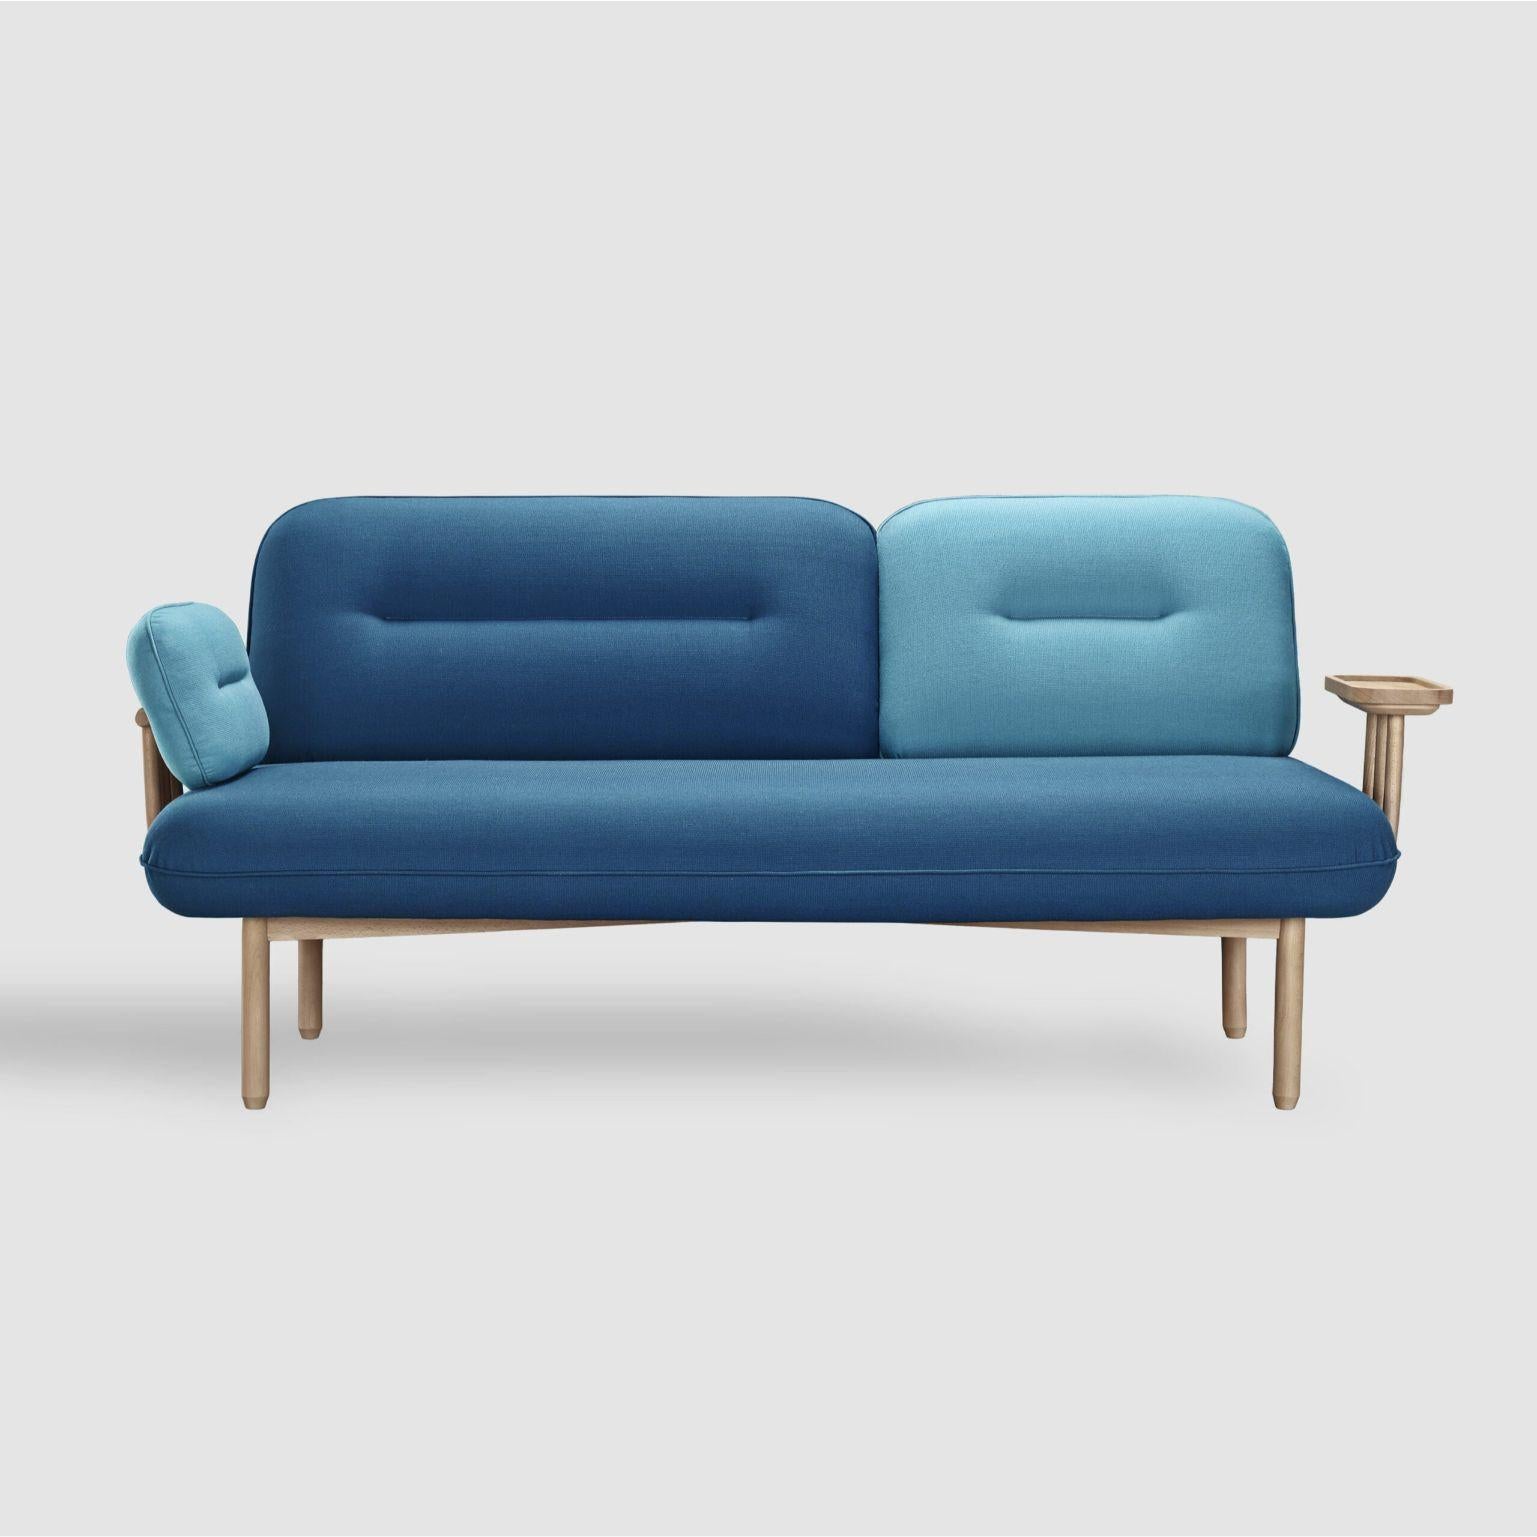 Blue Cosmo sofa by La Selva
Dimensions: W195, D85, H85, Seat45
Materials: Pine and beech wood structure reinforced with plywood
Arms and backrest frame treated with the steam bending technique
Foam CMHR (high resilience and flame retardant) for